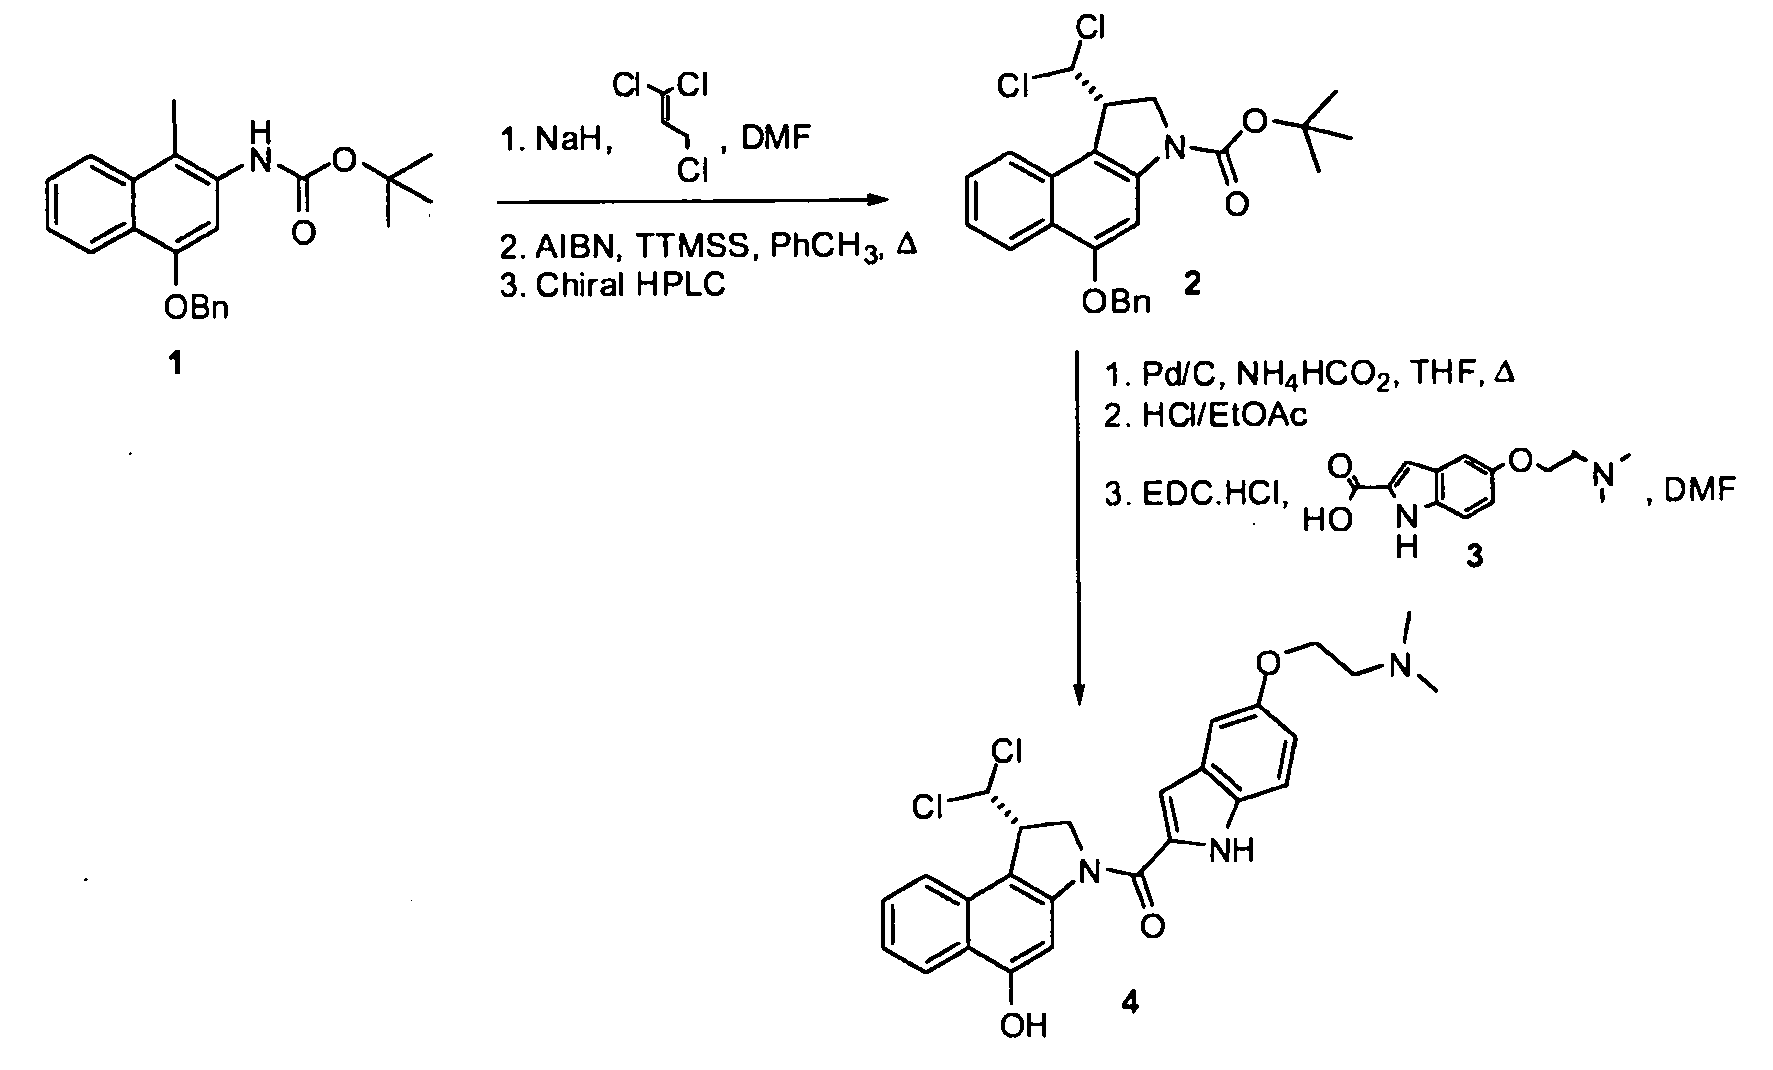 Substituted CC-1065 Analogs and Their Conjugates